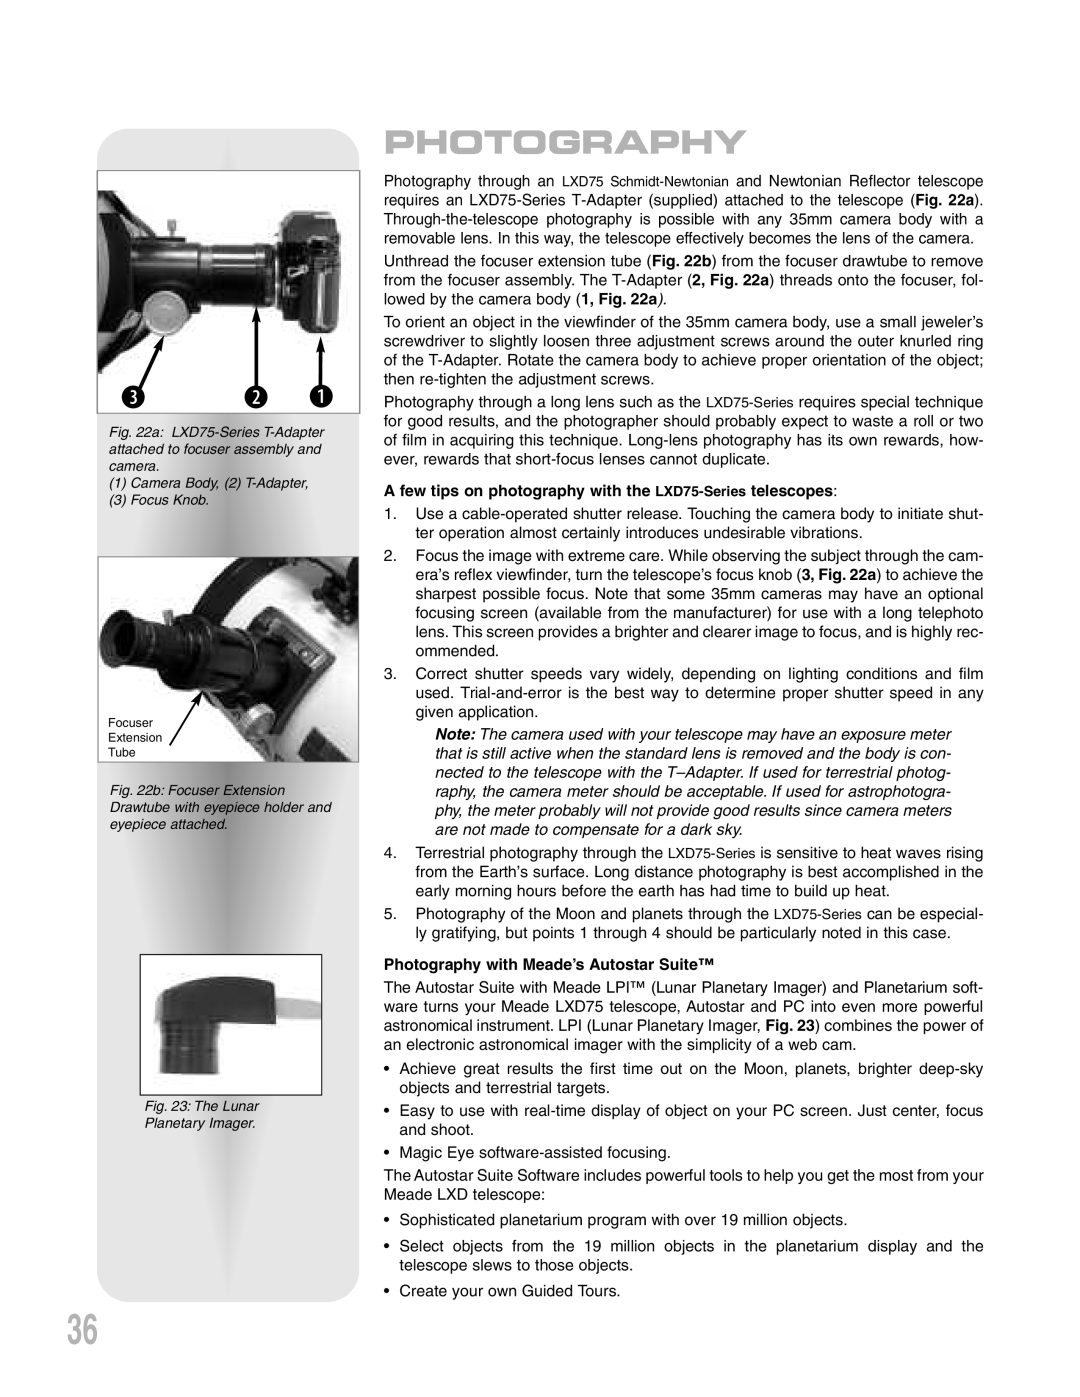 Meade LXD 75-Series instruction manual d C B, Photography with Meade’s Autostar Suite 